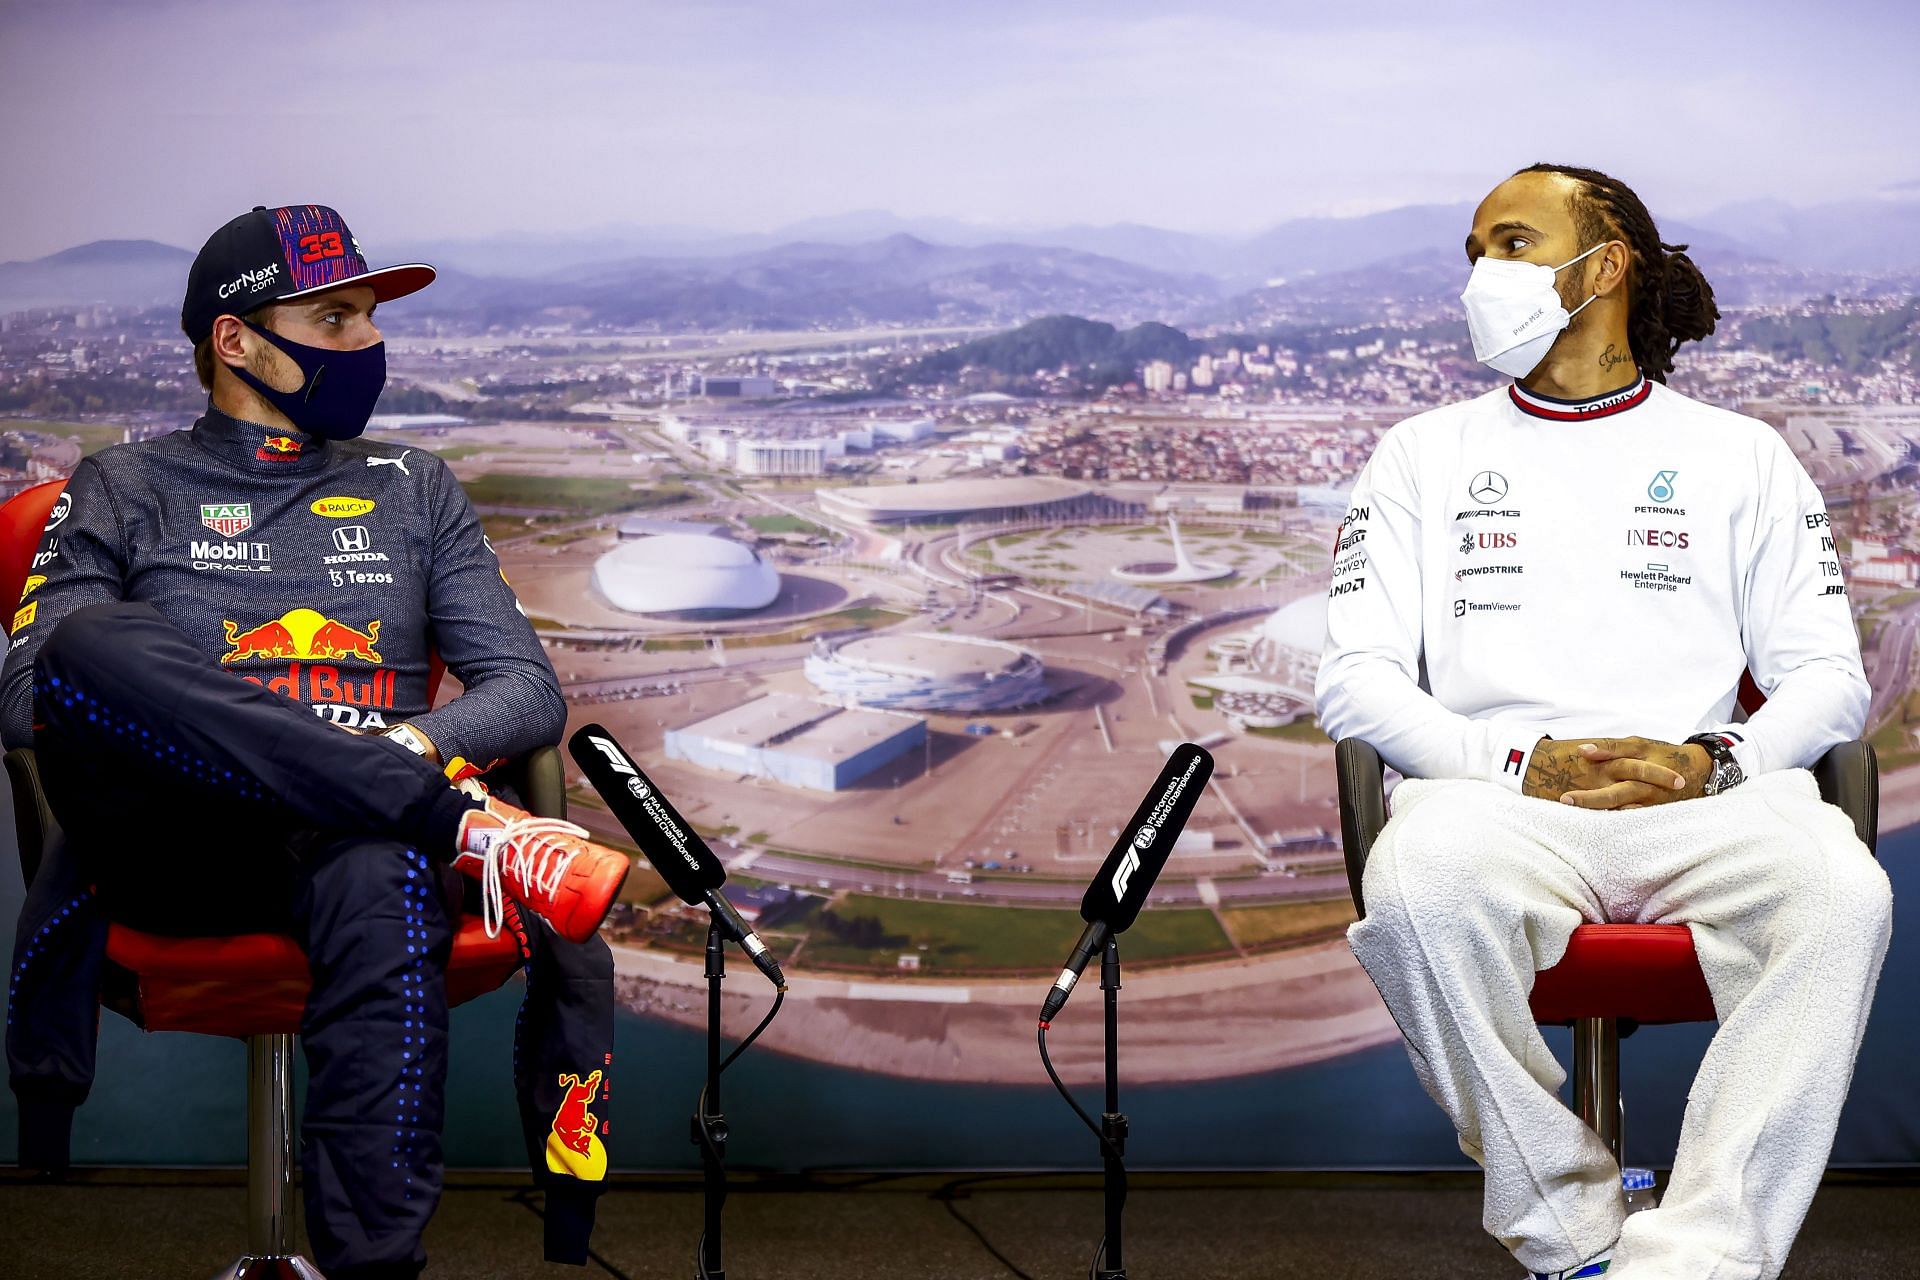 Lewis Hamilton (R) feels he would have dealt with the Monza crash differently. (Photo courtesy: Andy Hone/Getty Images)